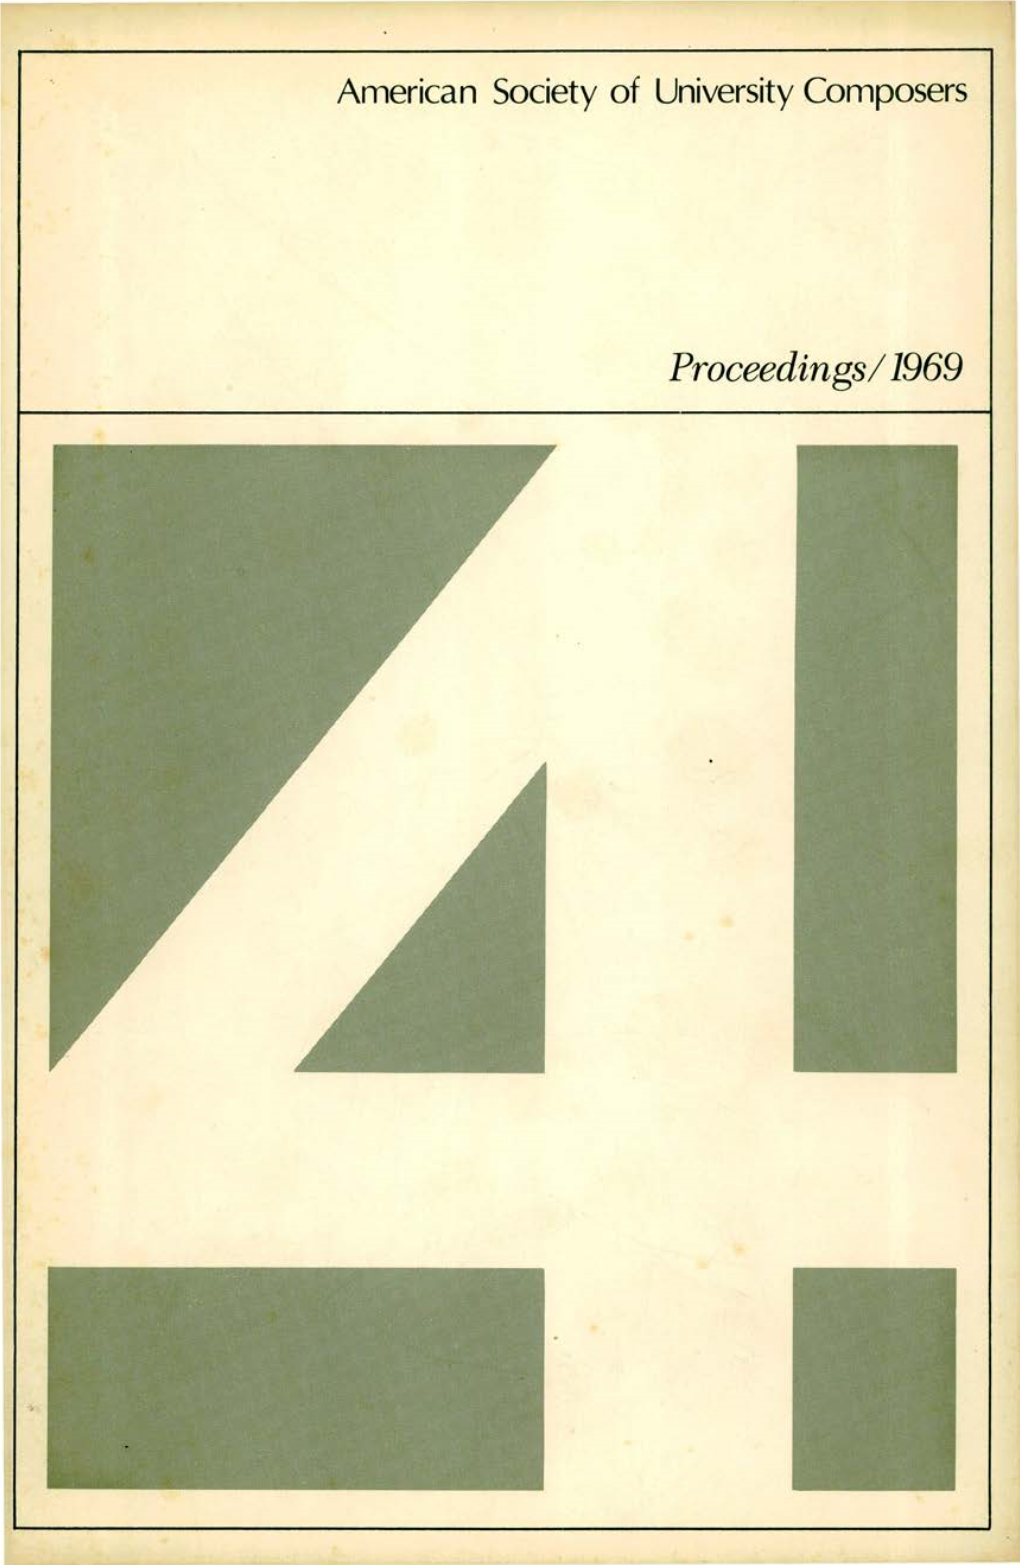 Proceedings! 1969 American Society of University Composers